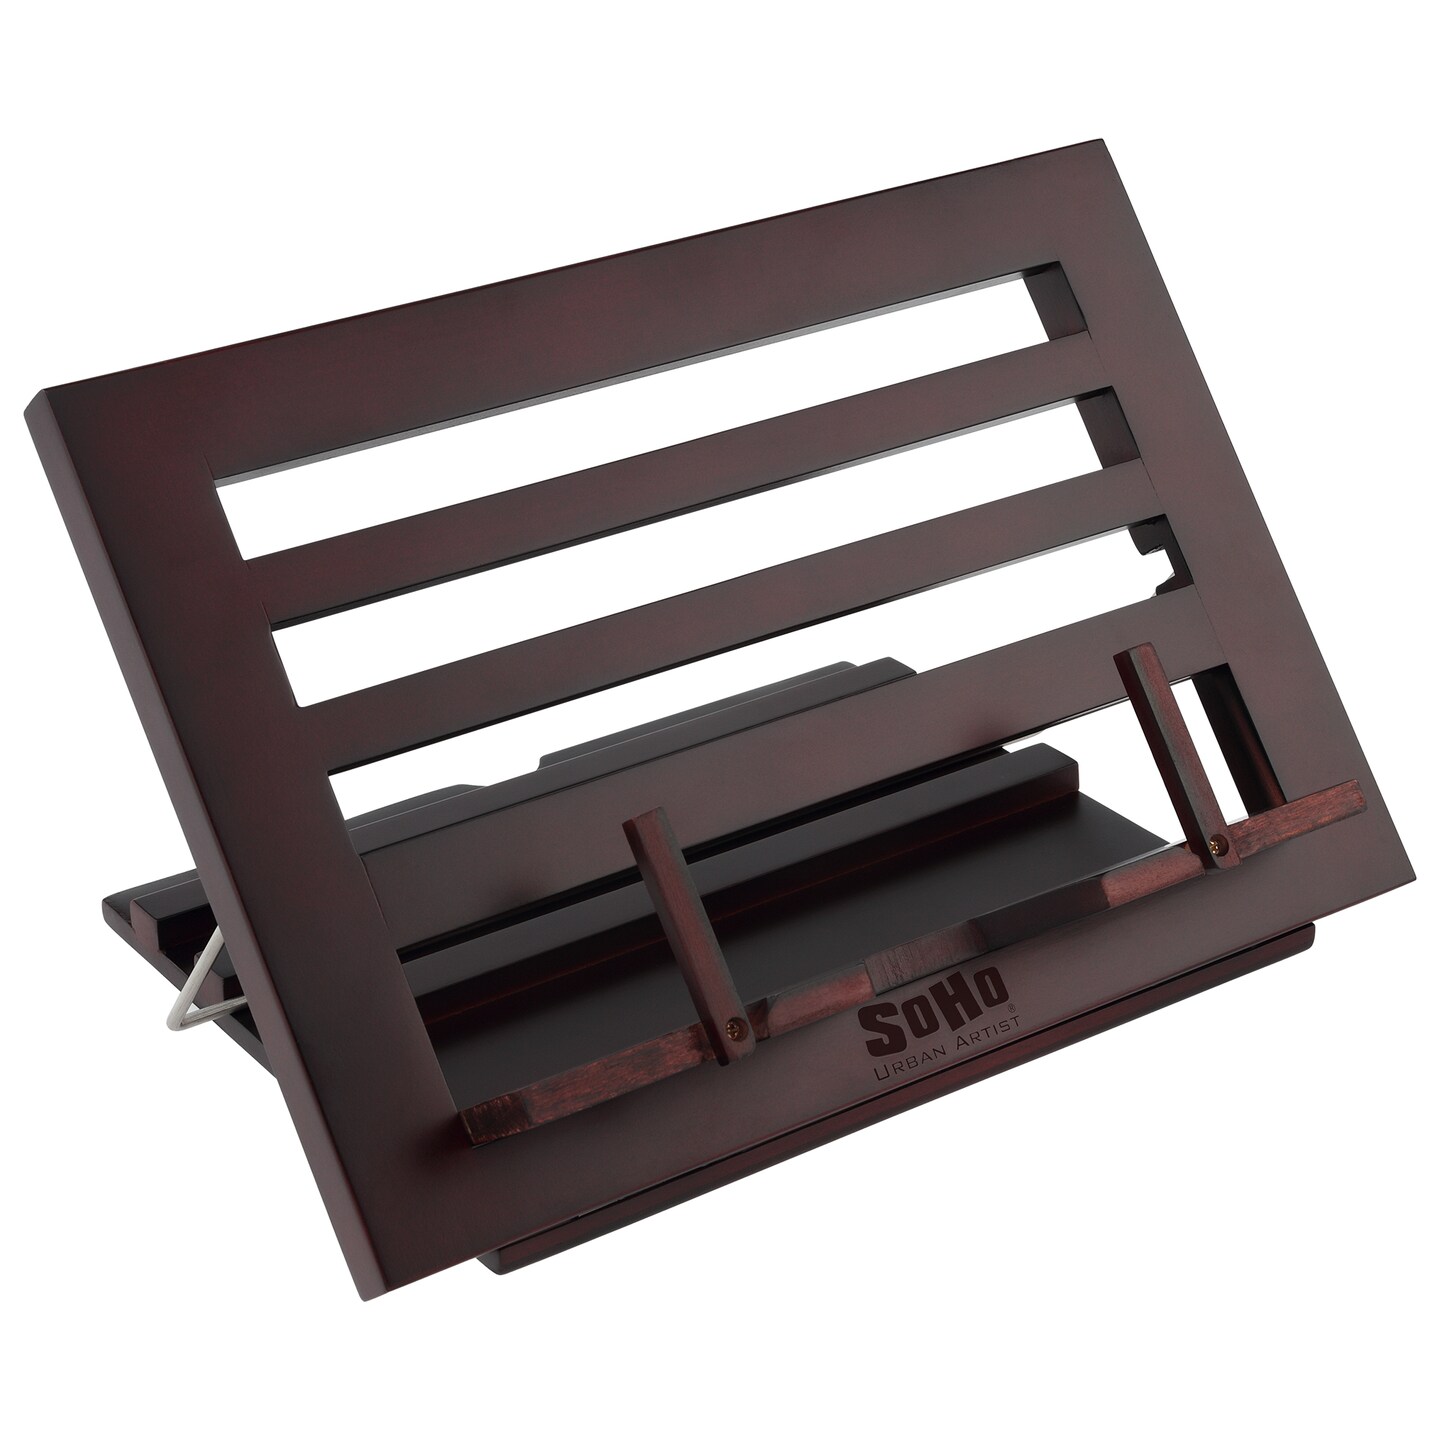 SoHo Urban Artist Tabletop Desk Easel for Painting - Mahogany Finish, Stylish Display Stand with Bookrest